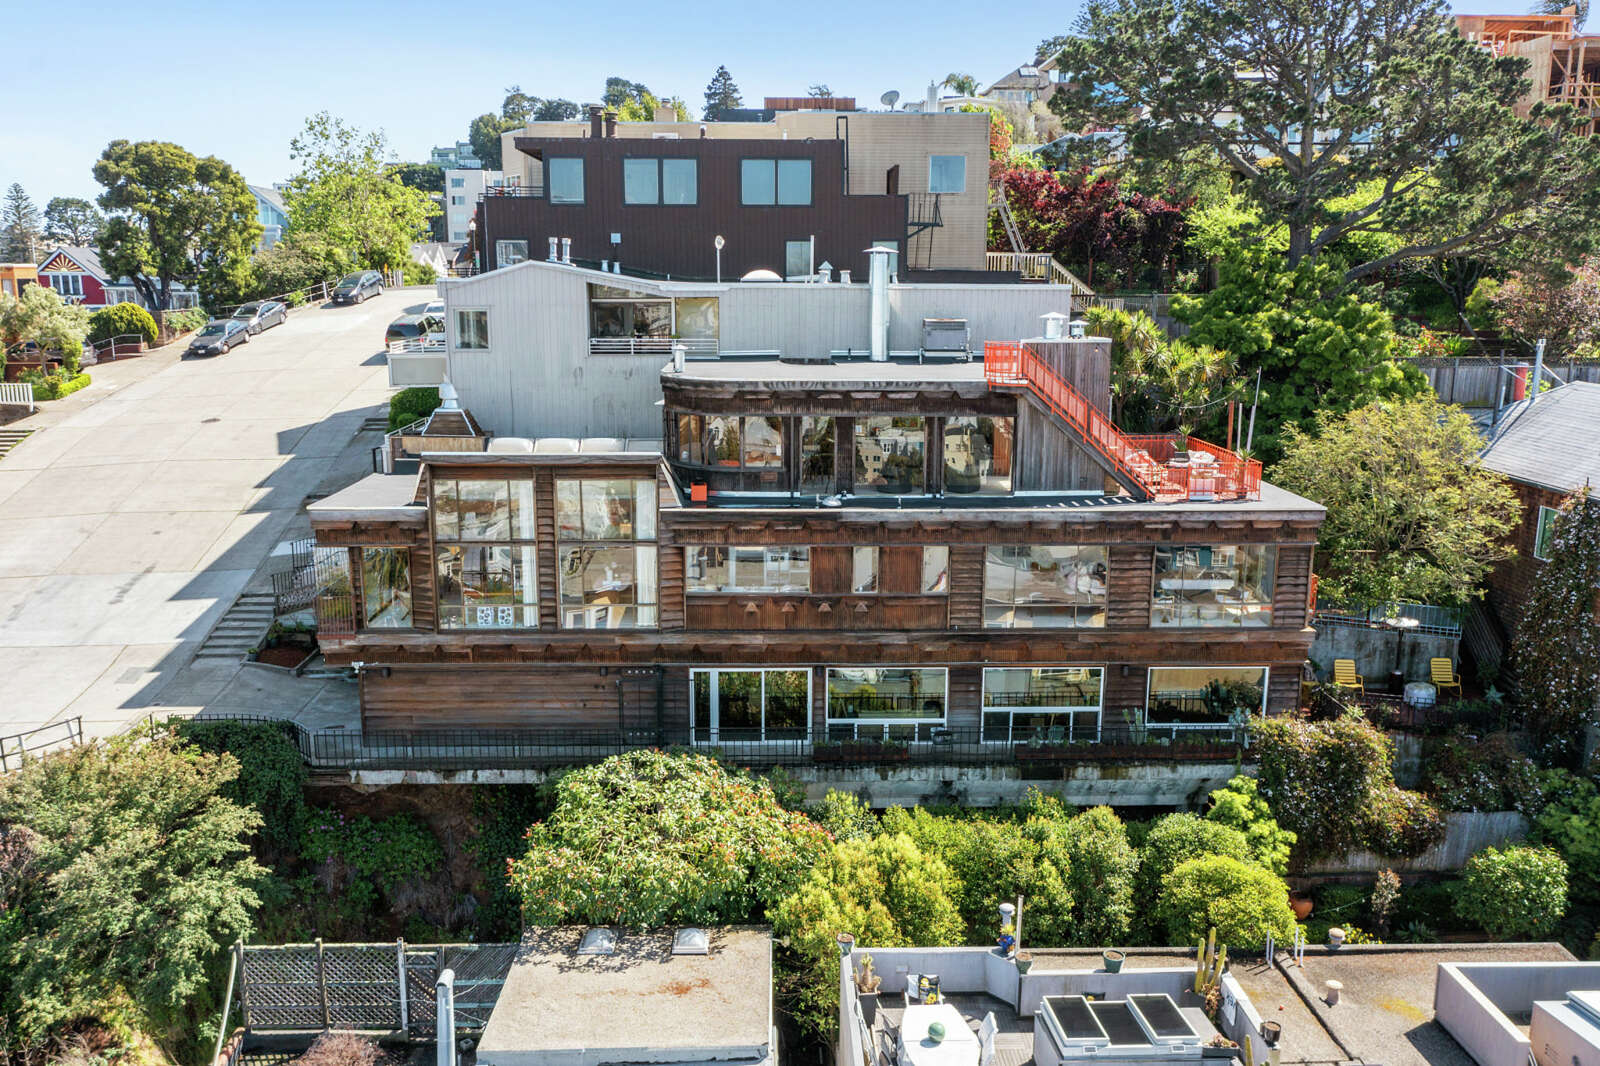 Real estate lull? San Francisco home with views sold for $1.4 million ...